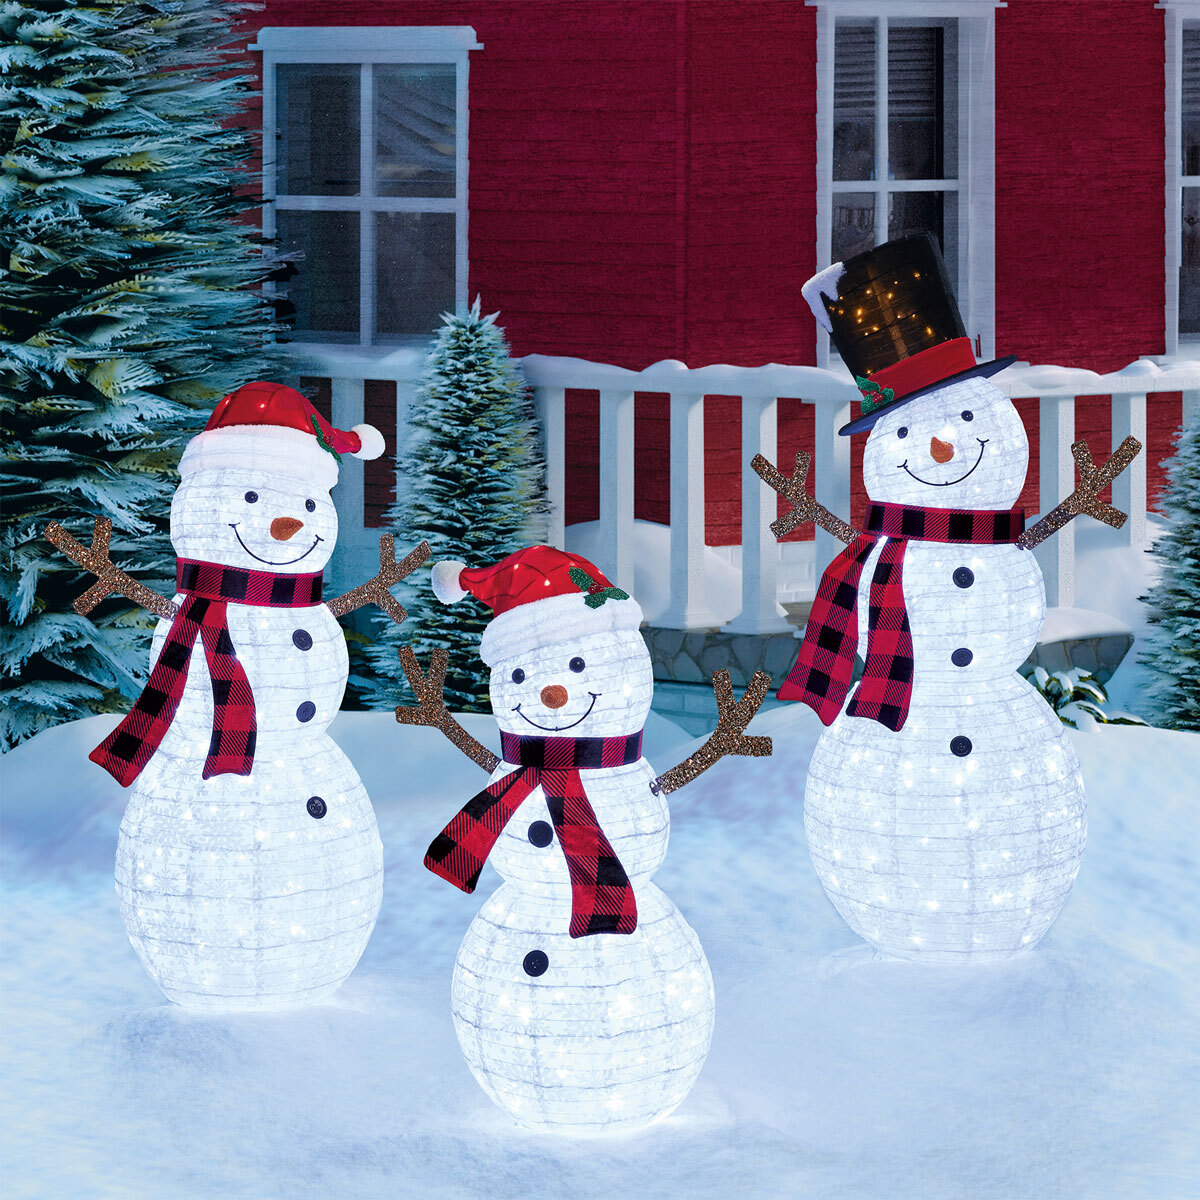 Buy Snowman Family Set of 3 Lifestyle Image at Costco.co.uk